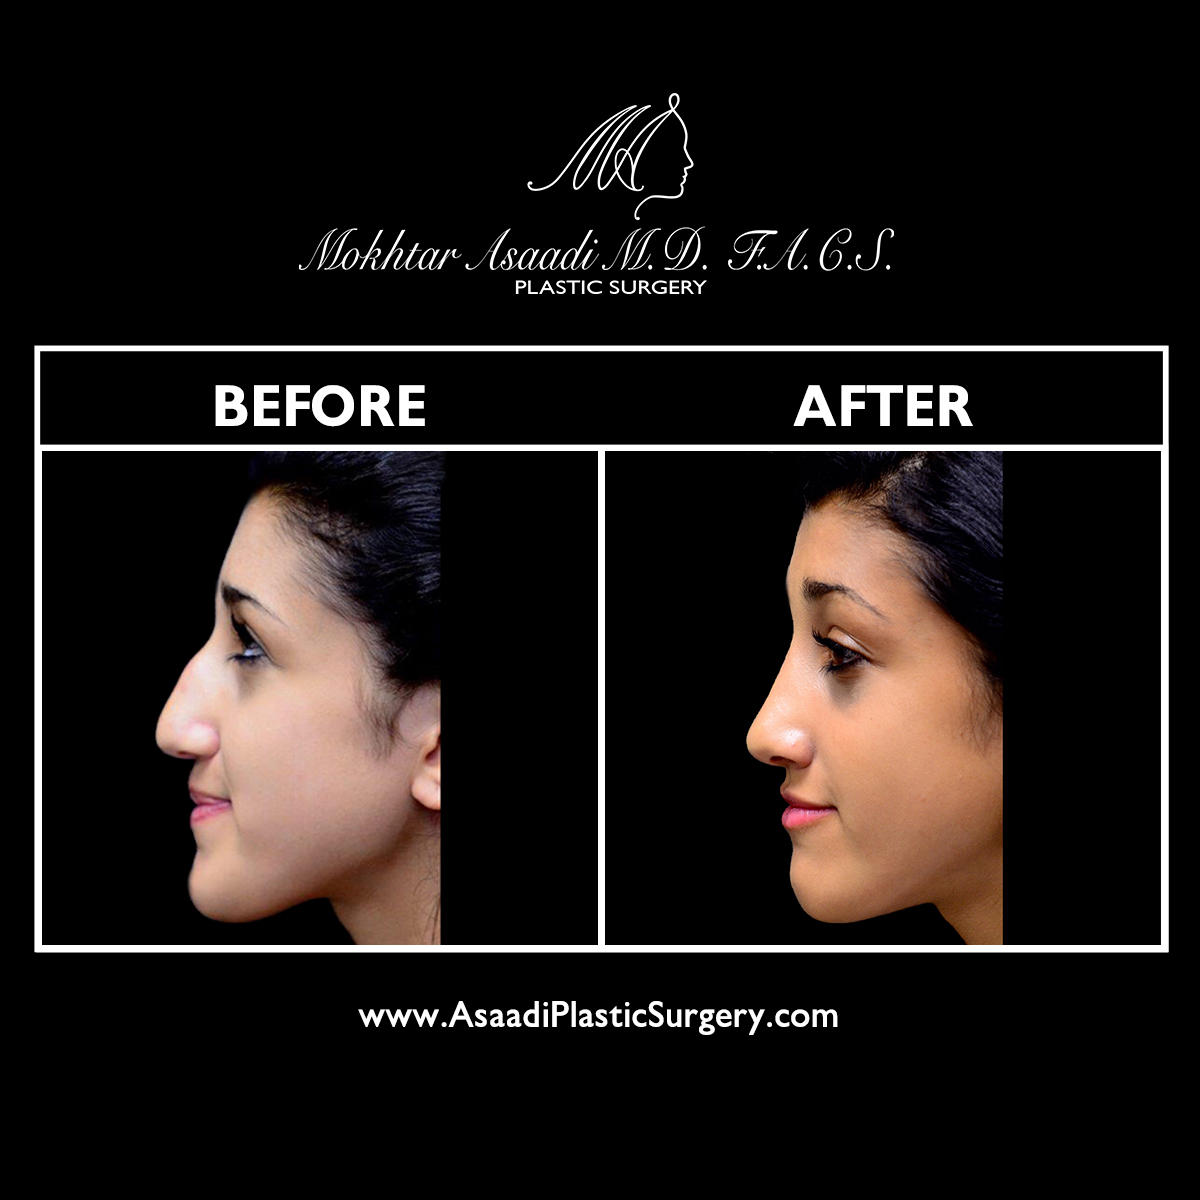 Rhinoplasty, a procedure to reshape your nose, can provide transformative results for the overall symmetry of your face. Patients seeking rhinoplasty in NJ turn to Asaadi Plastic Surgery for the most natural-looking results. Rhinoplasty can correct the tip or bridge of your nose by narrowing the nostrils or changing the angle of your nose and your upper lip. The rhinoplasty procedure can also correct a deviated septum.